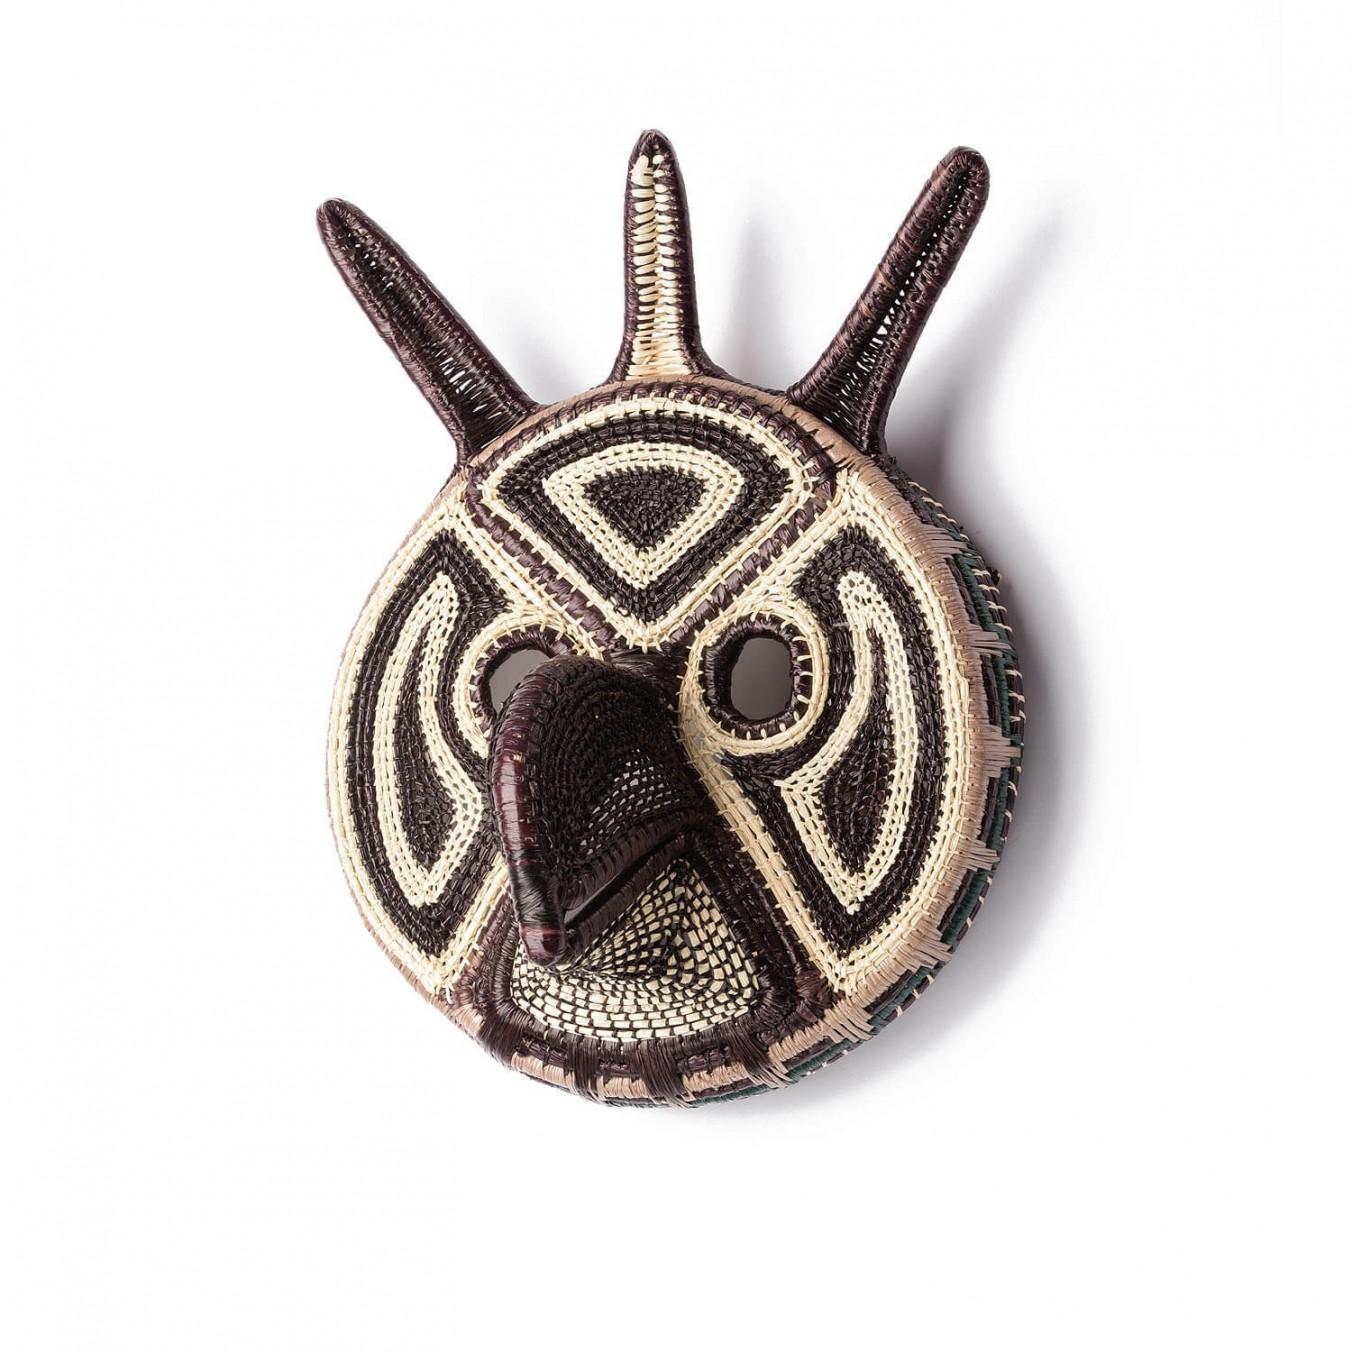 Decorative hand-woven mask from Panama, Mascara by Ethic&Tropic

Extraordinary art and decorative items, these masks come from the shamanic beliefs and rituals of indigenous Embera tribes of Panama. Through the shamans, Embera people get in contact